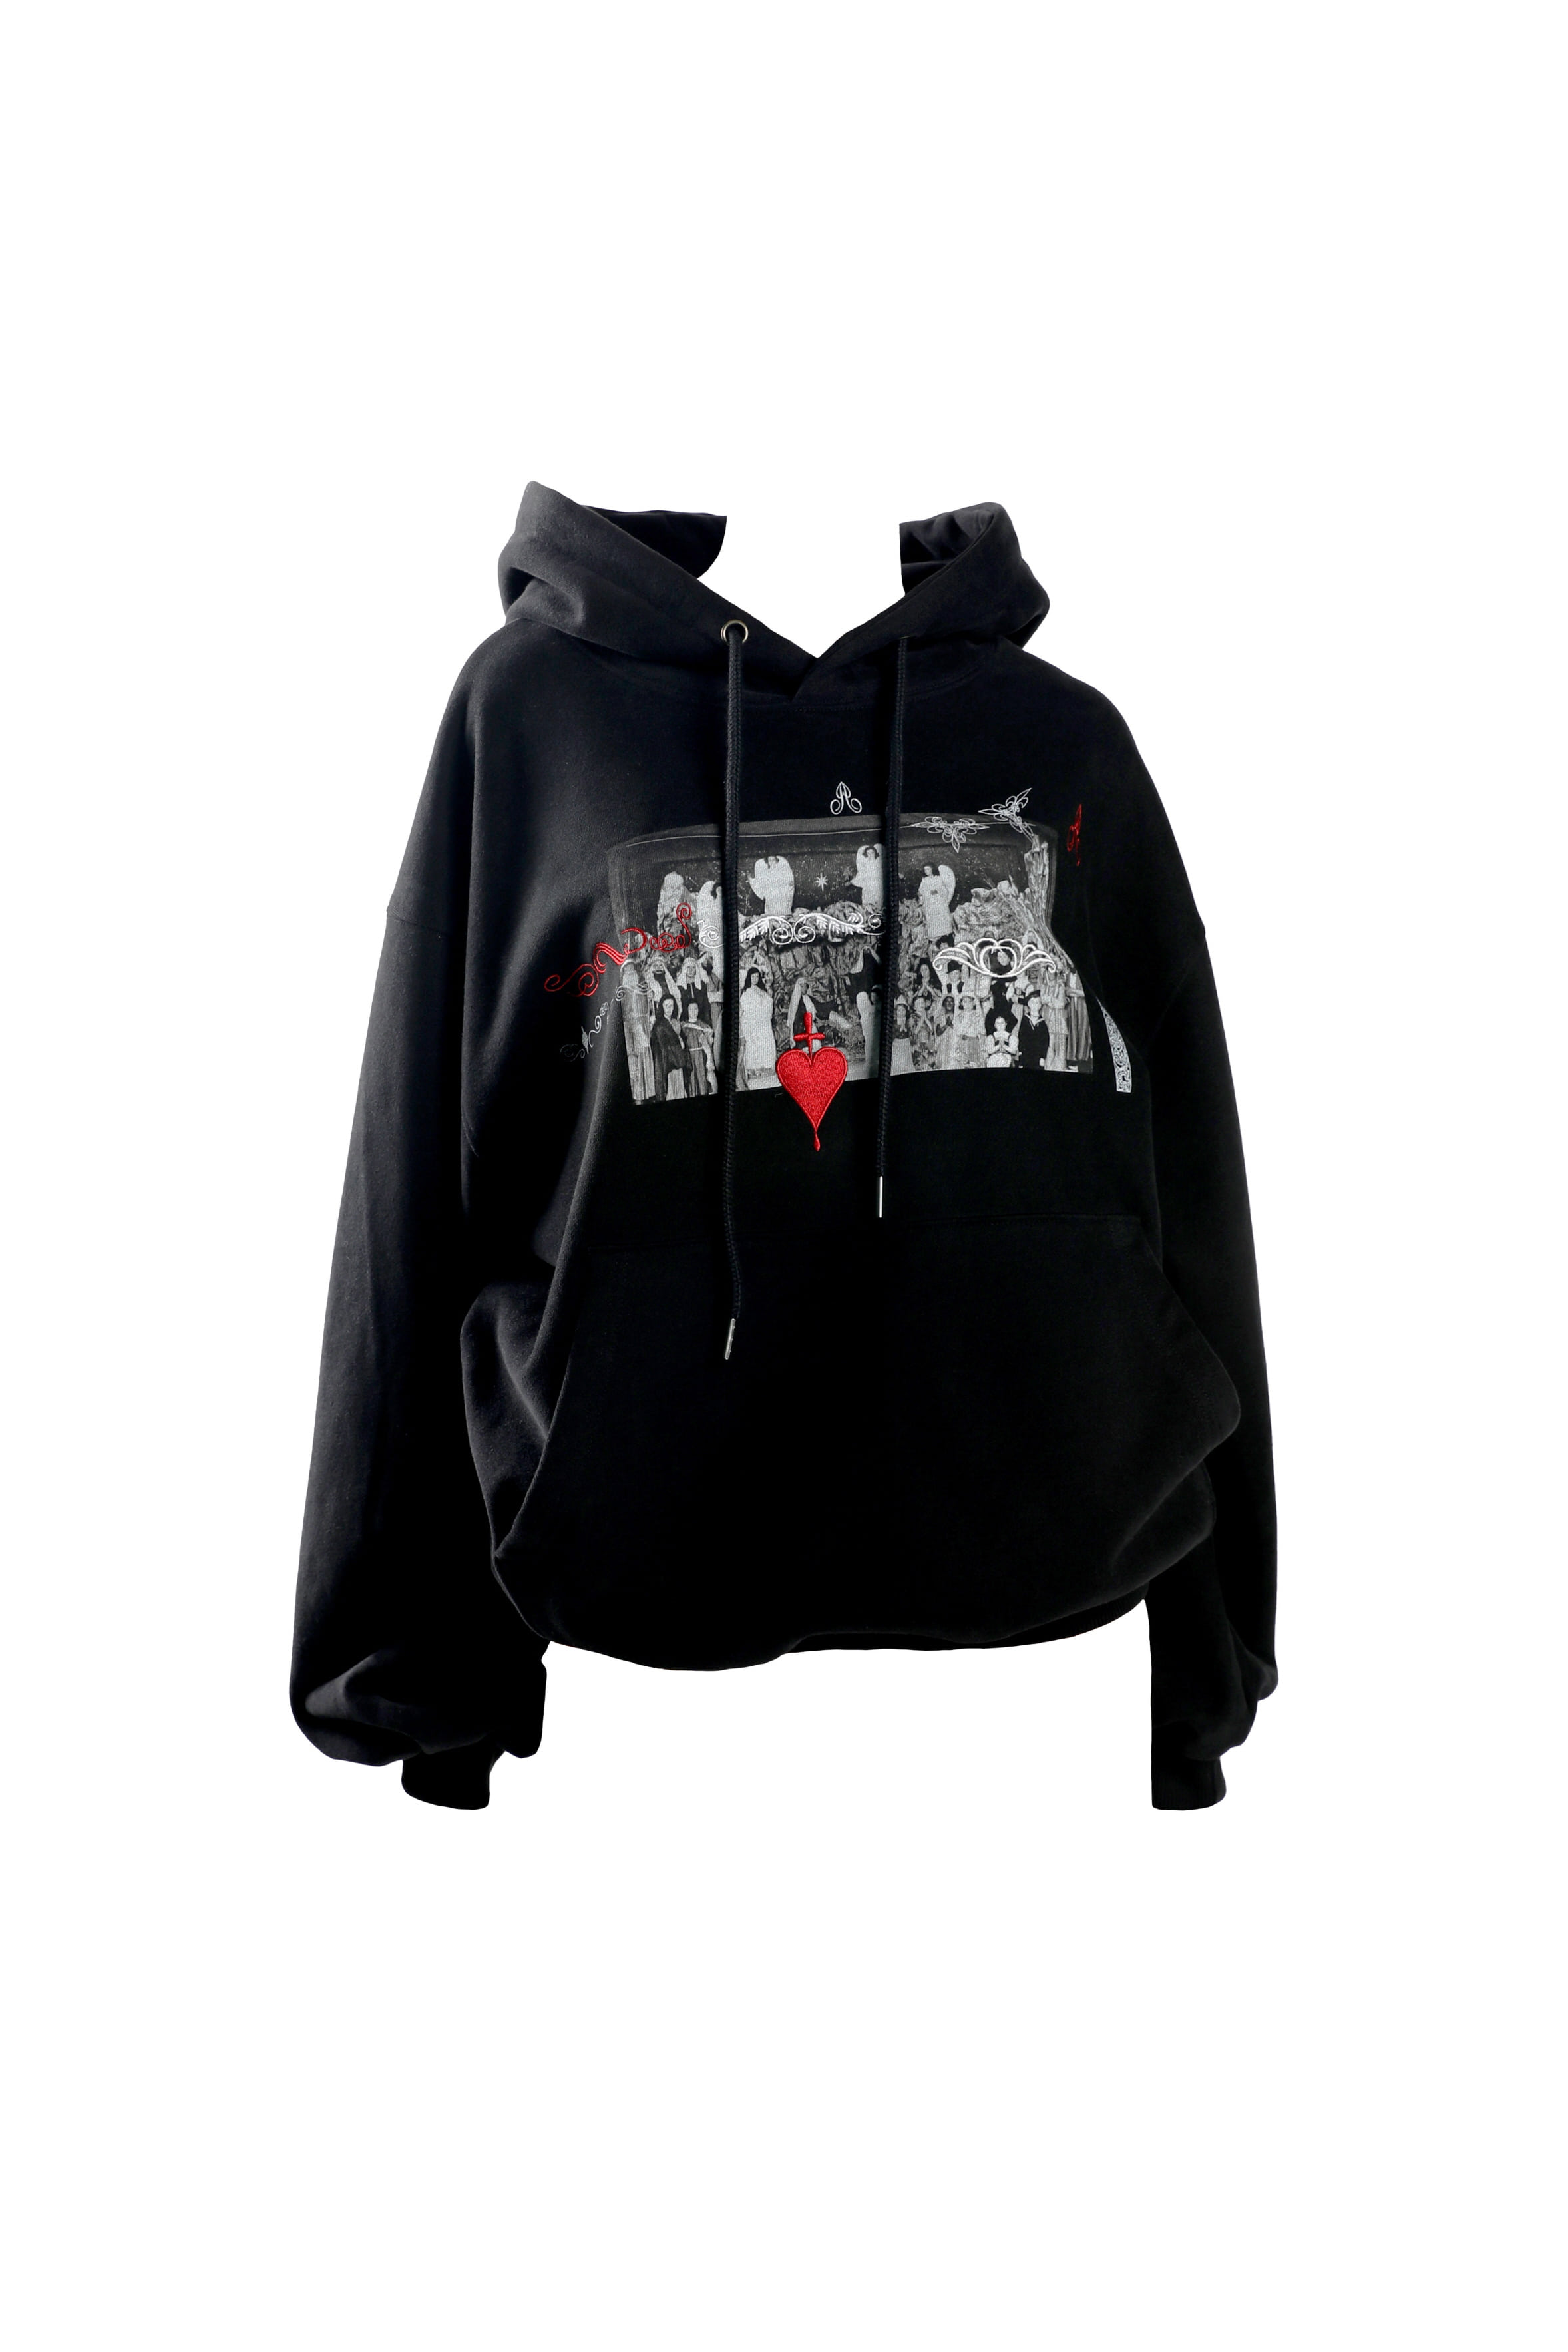 [only 2] Theater club hoodie ver.2 (black)